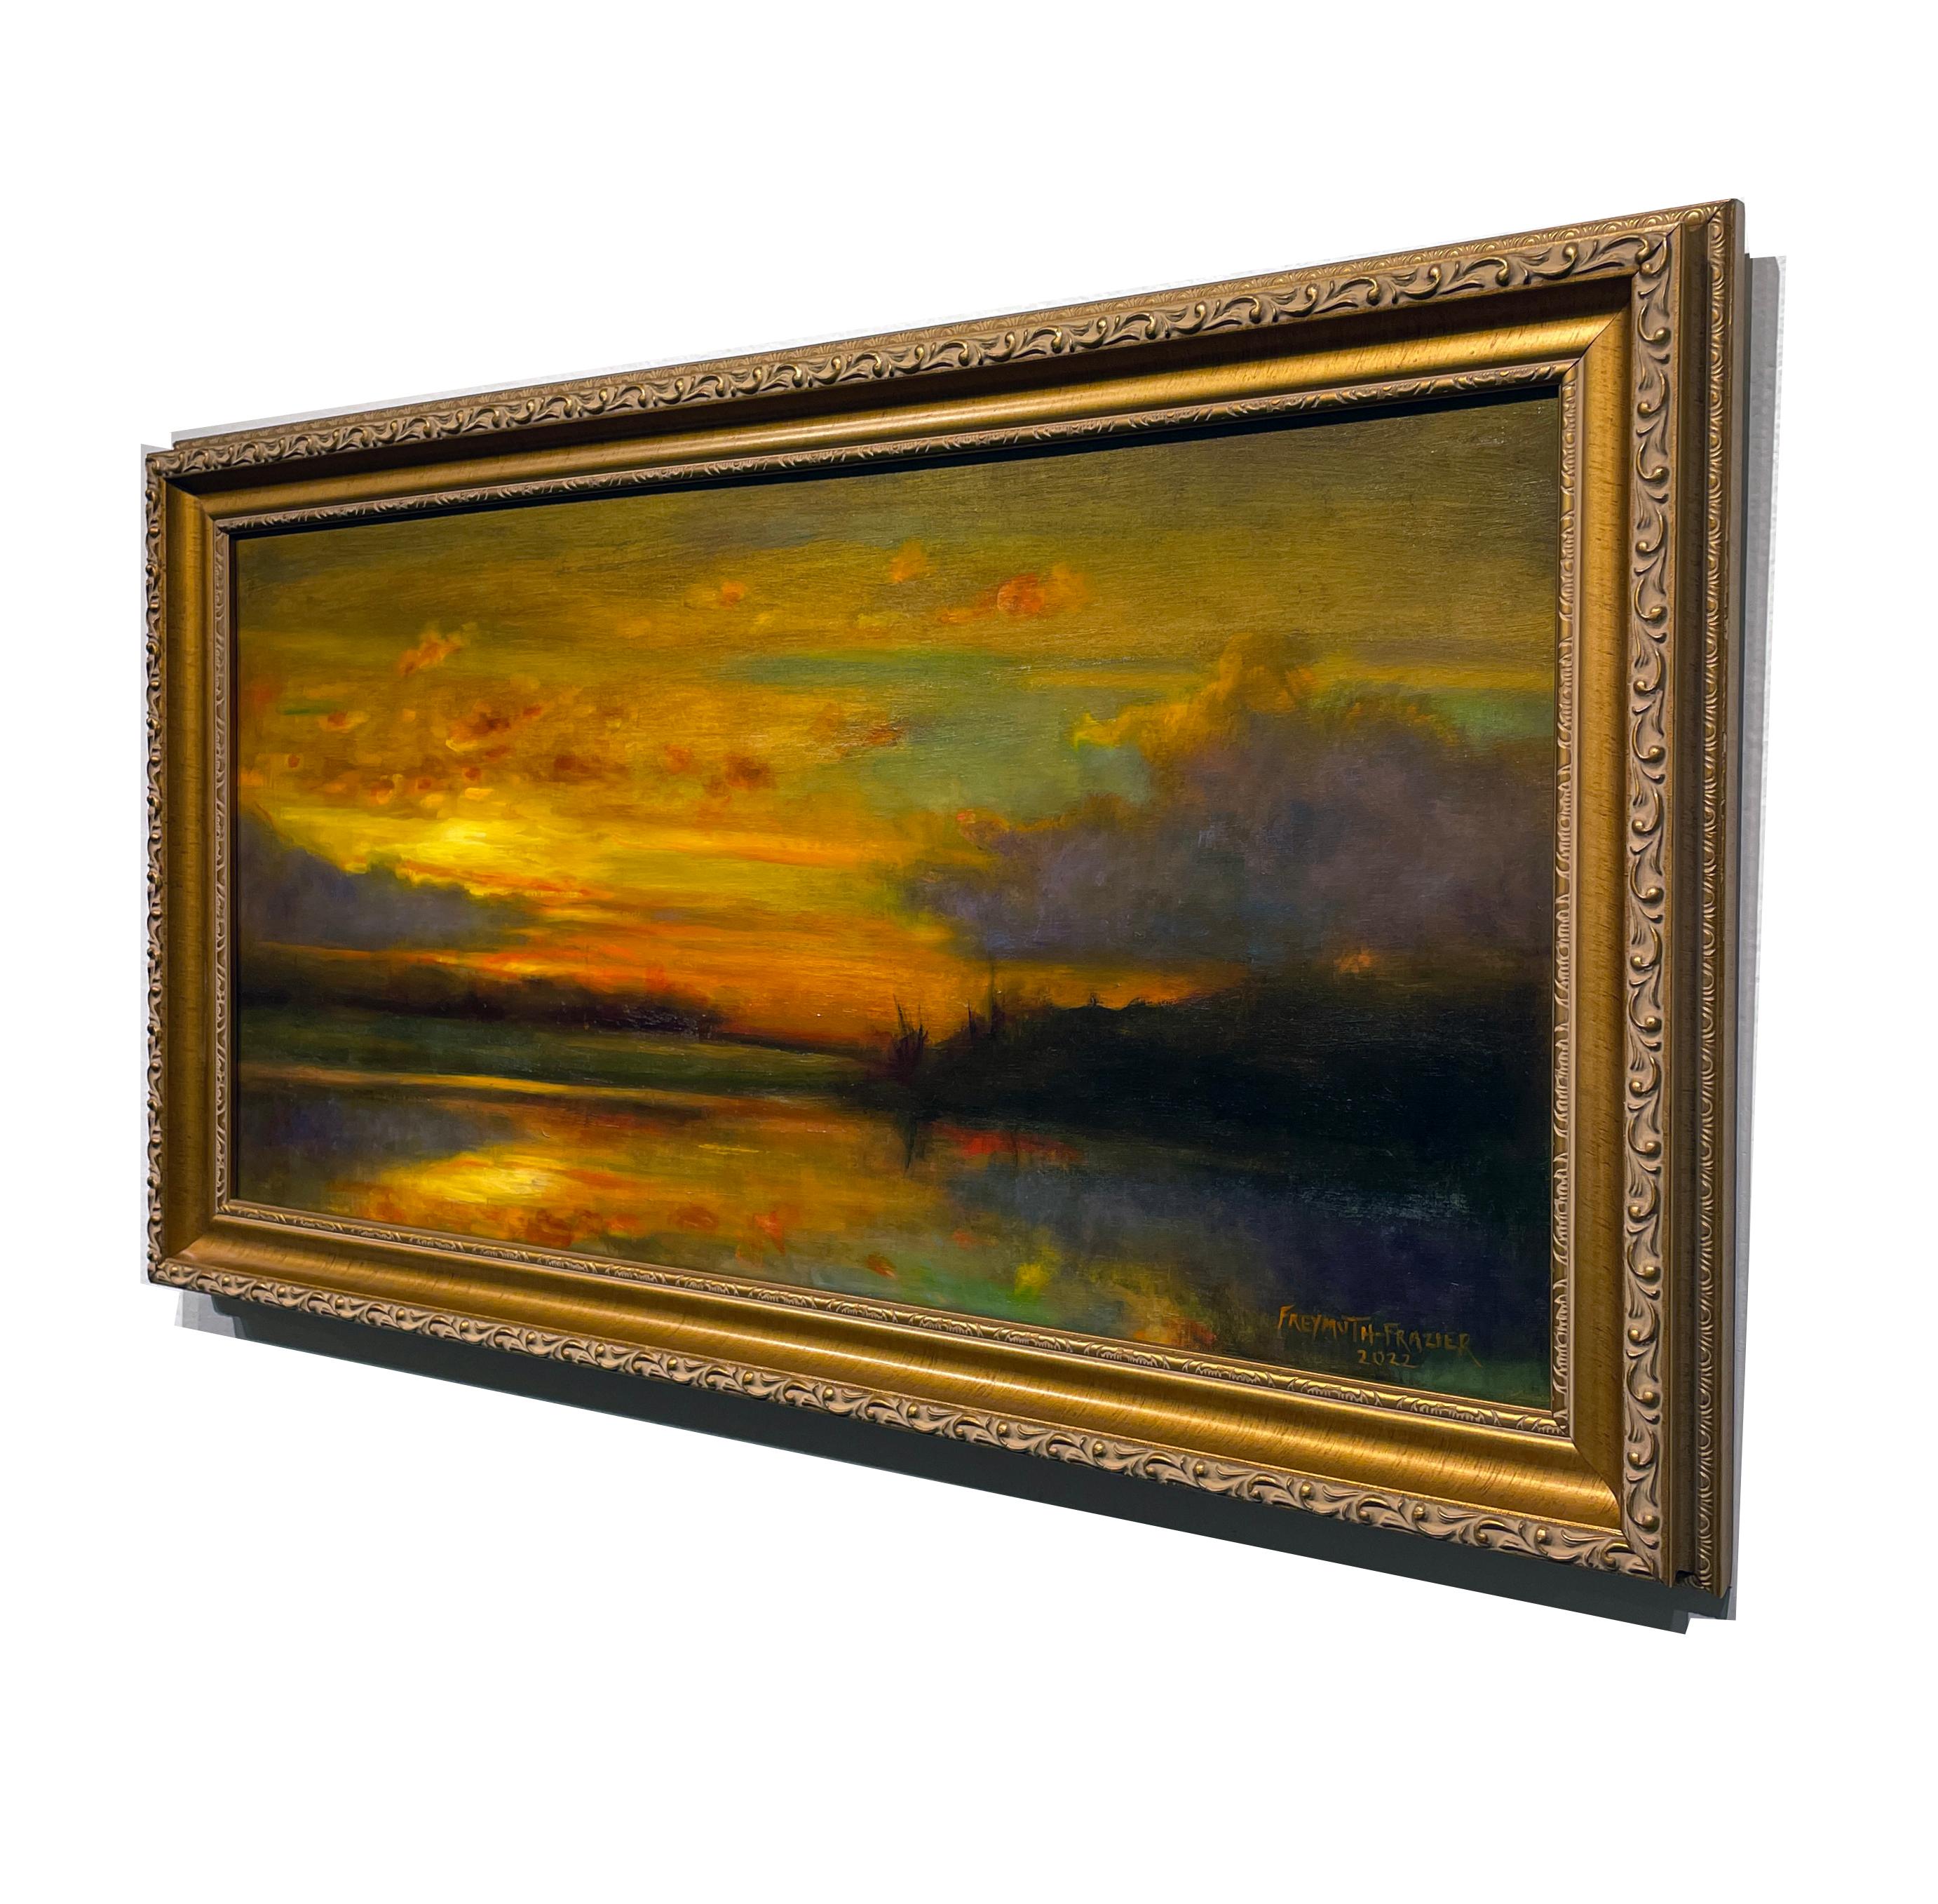 Origin Story - Original Oil Painting w/ Setting Sun Reflecting Romantic Colors - Brown Landscape Painting by Rose Freymuth-Frazier